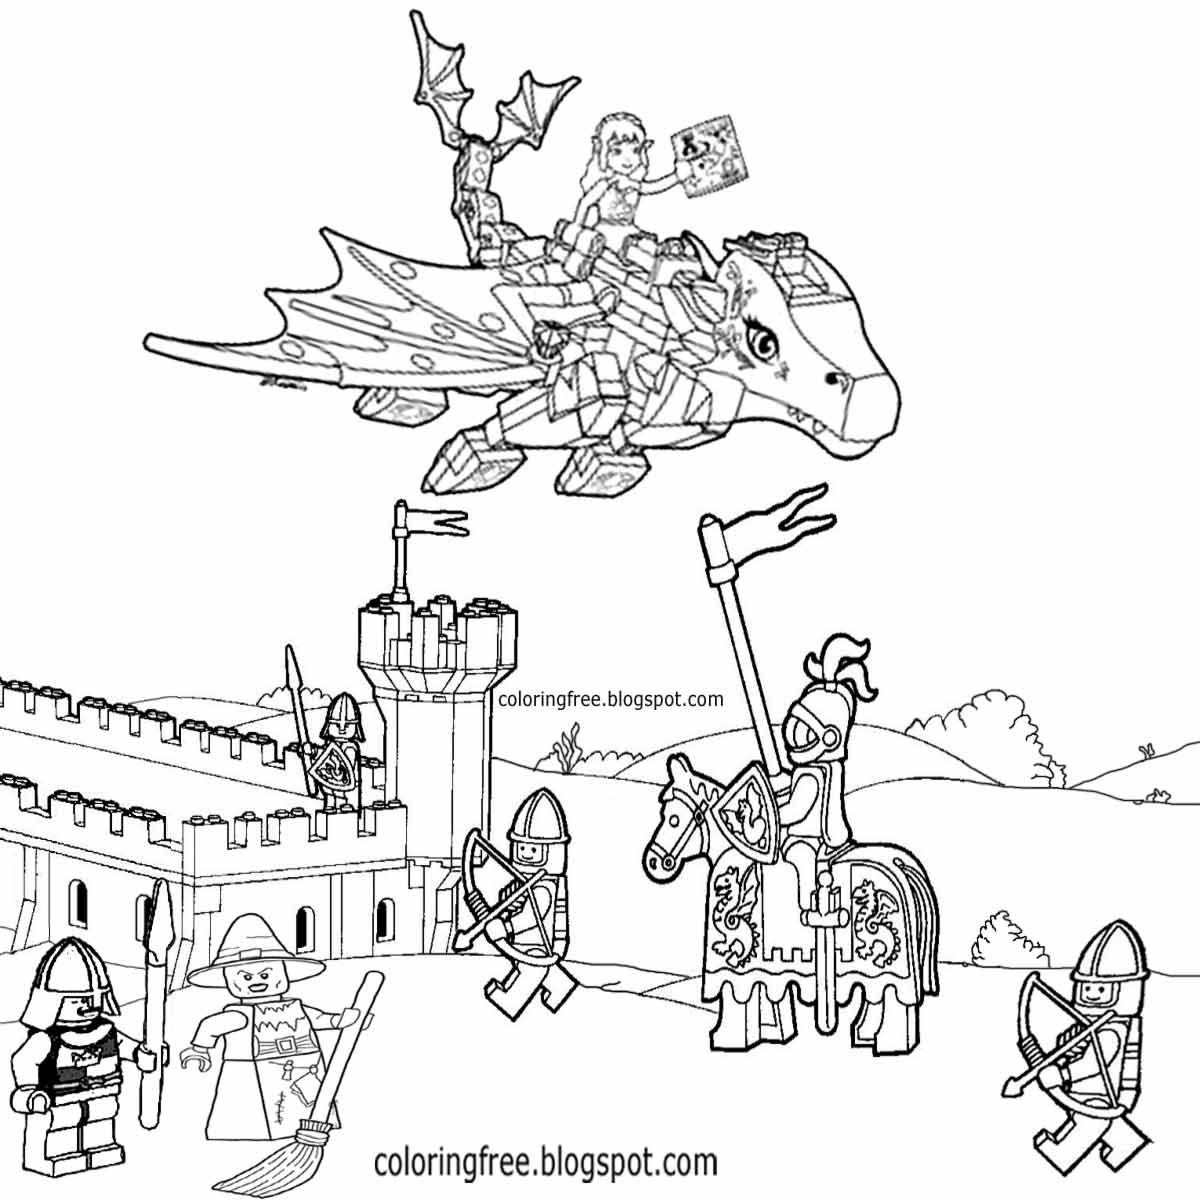 Lego Dragon Coloring Pages at GetColorings.com | Free printable